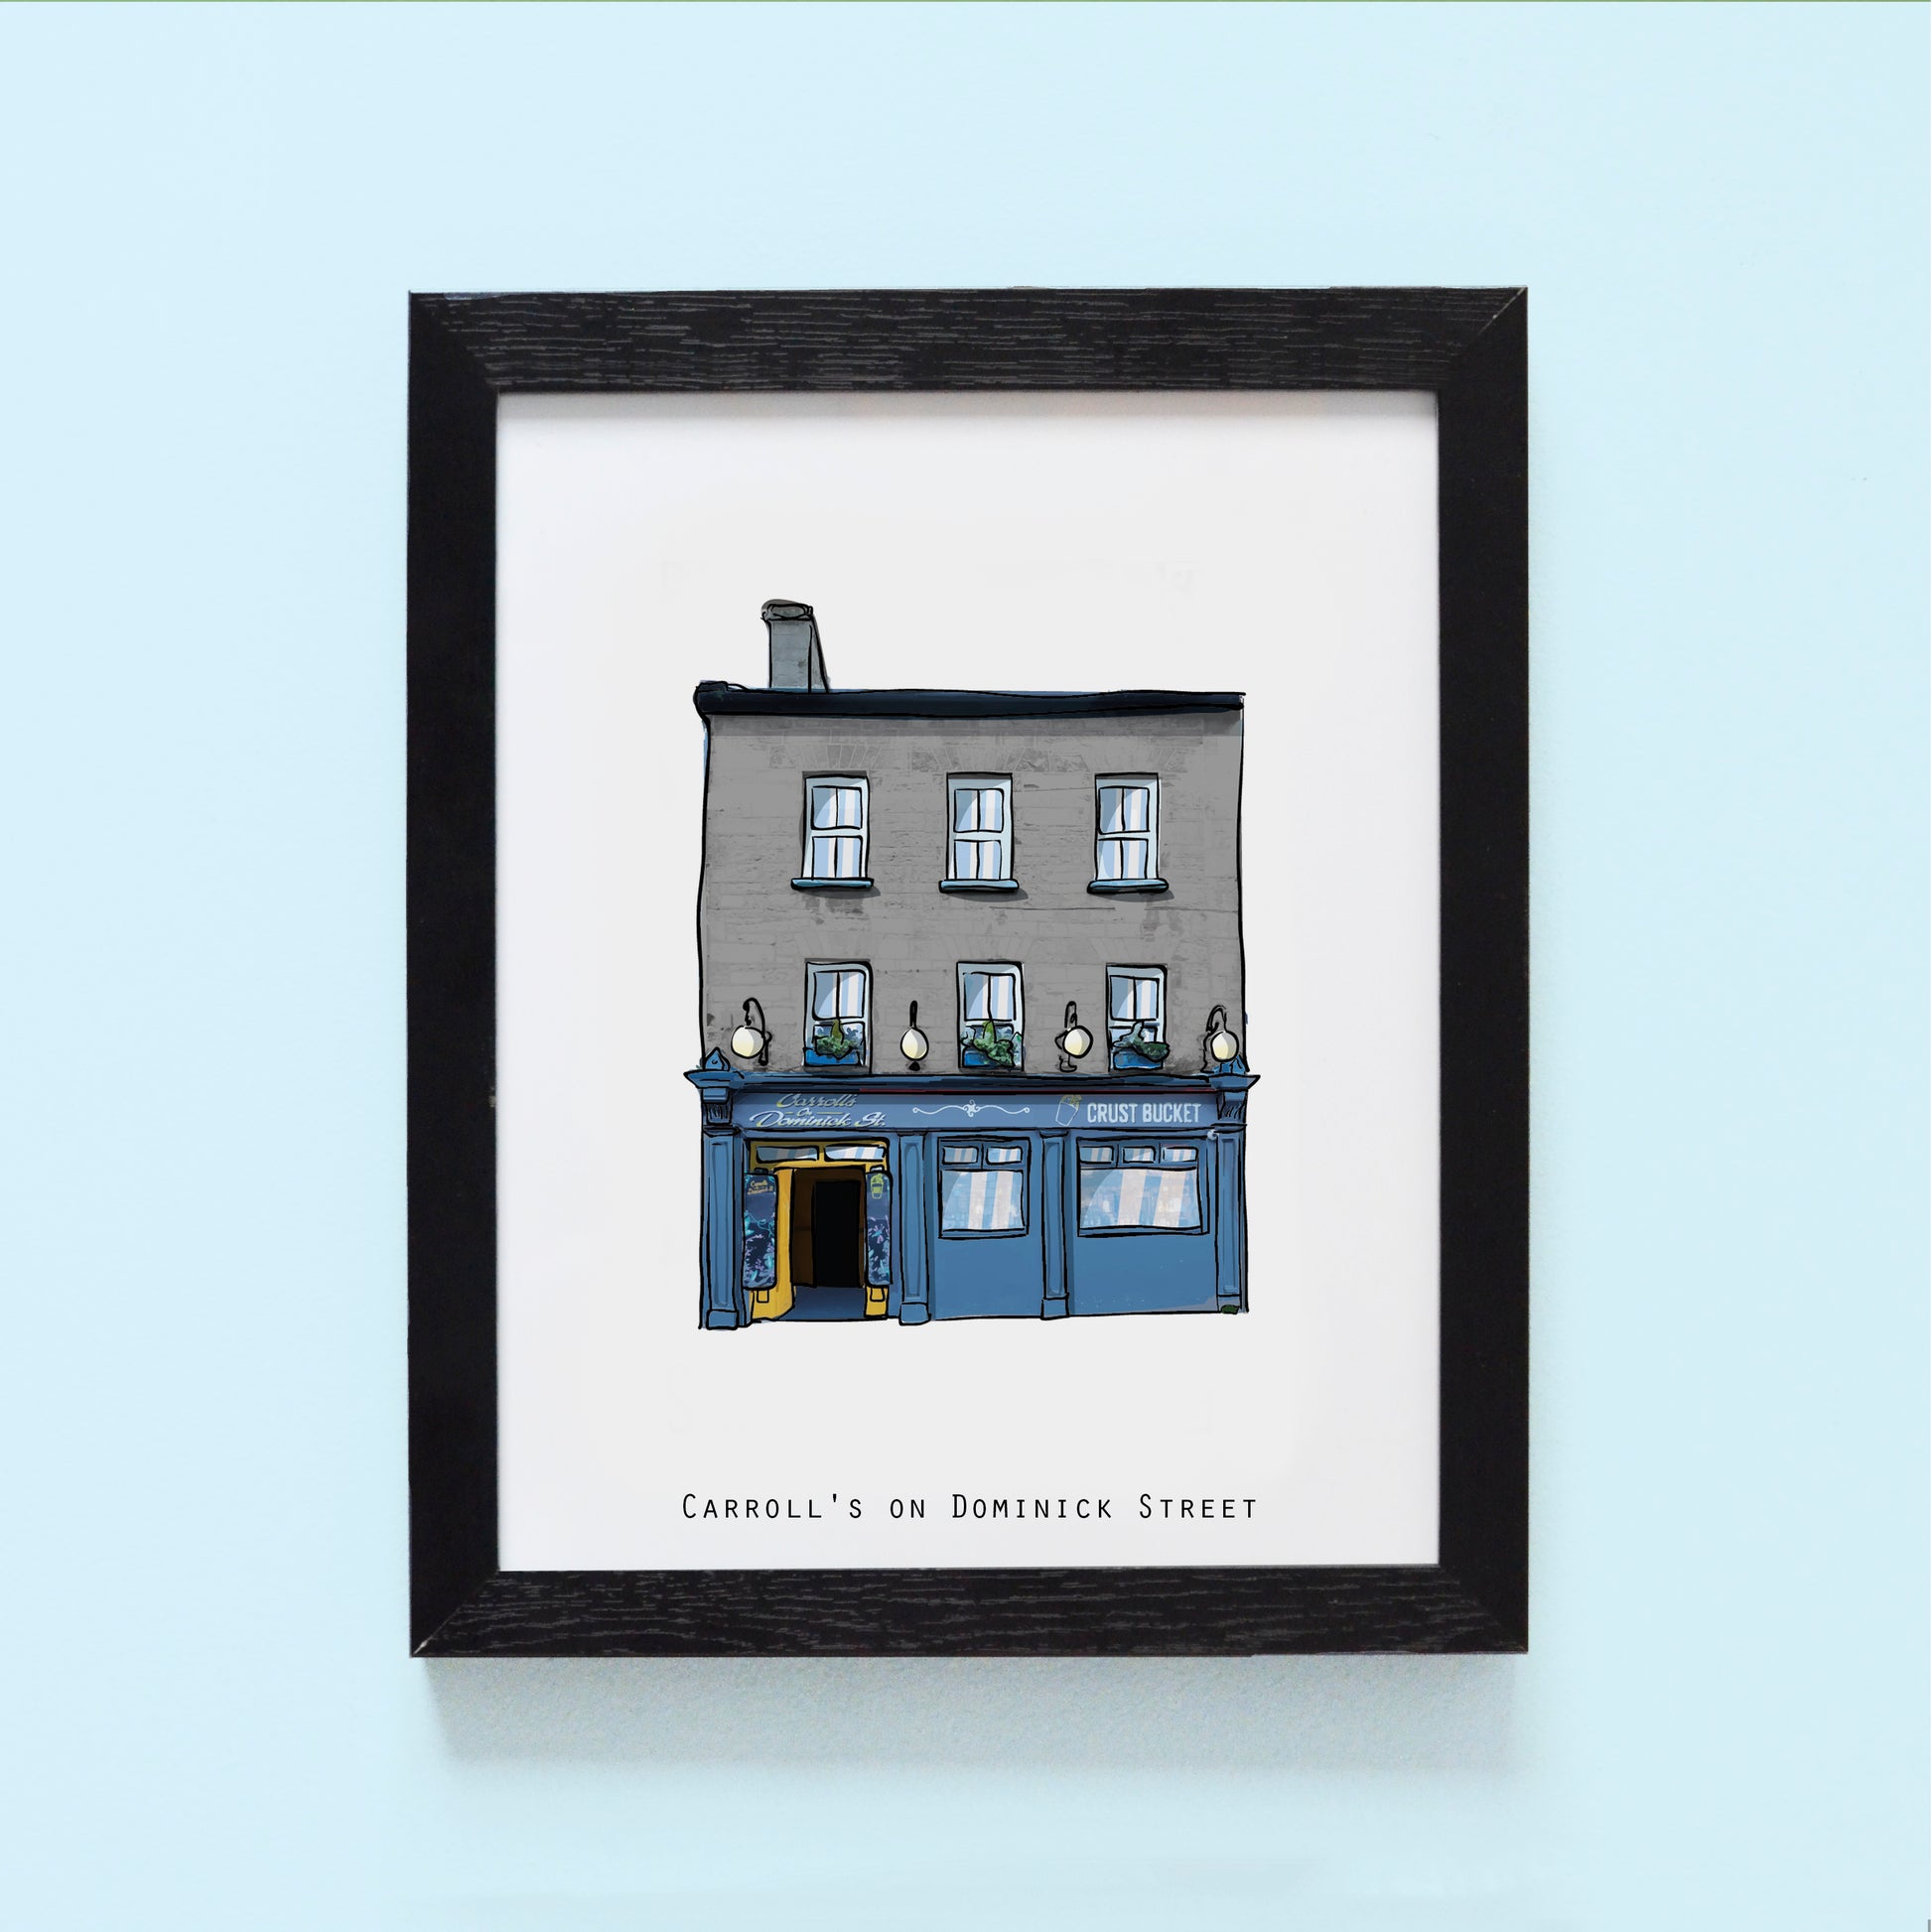 Carroll's on Dominick Street Illustrated Pubs of Galway